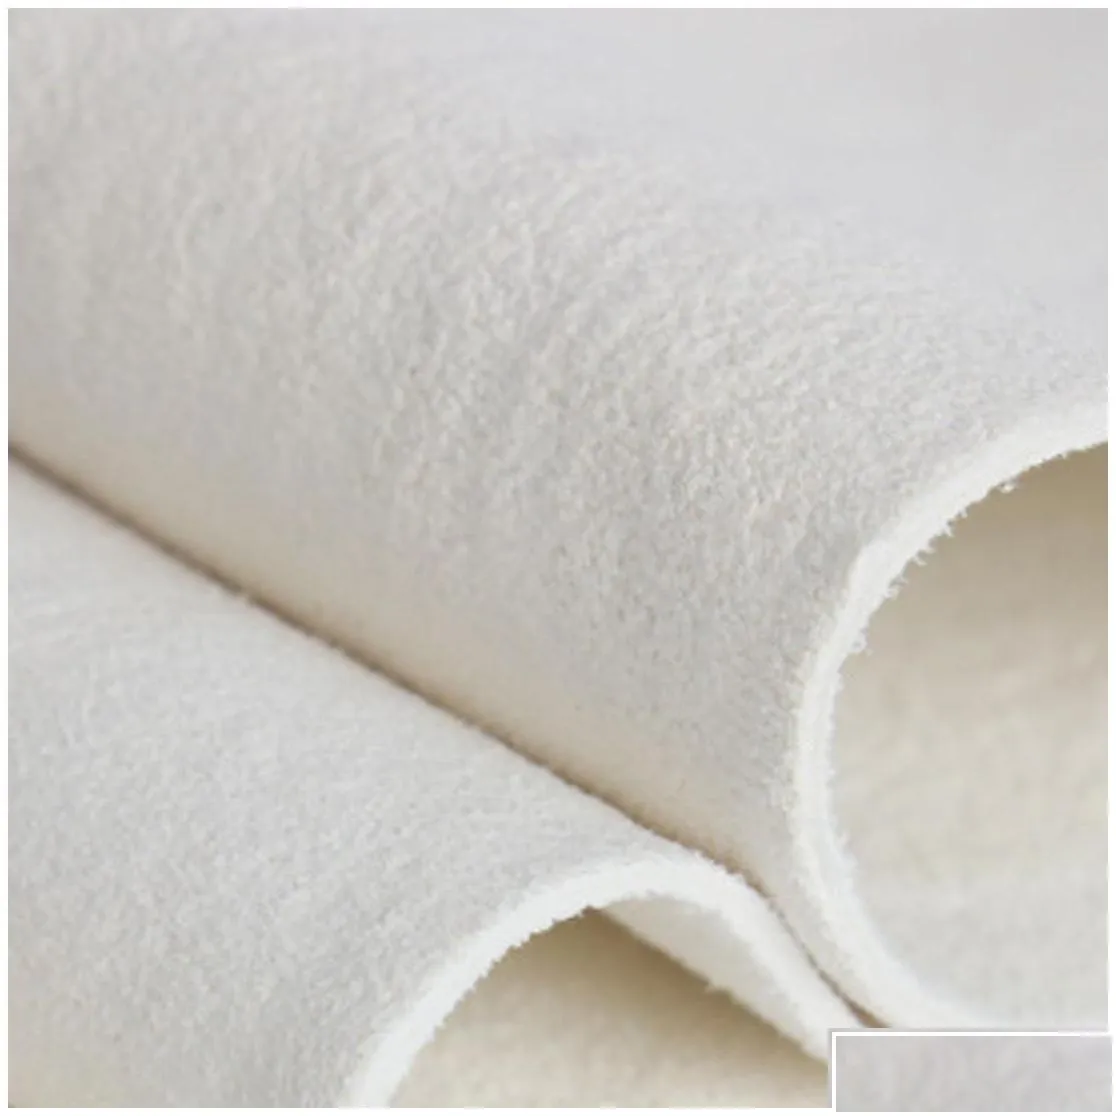 towel 60x80cm care natural chamois leather cleaning genuine wash suede absorbent quick dry streak lint car 40cm 50cm 60cm glasses dr